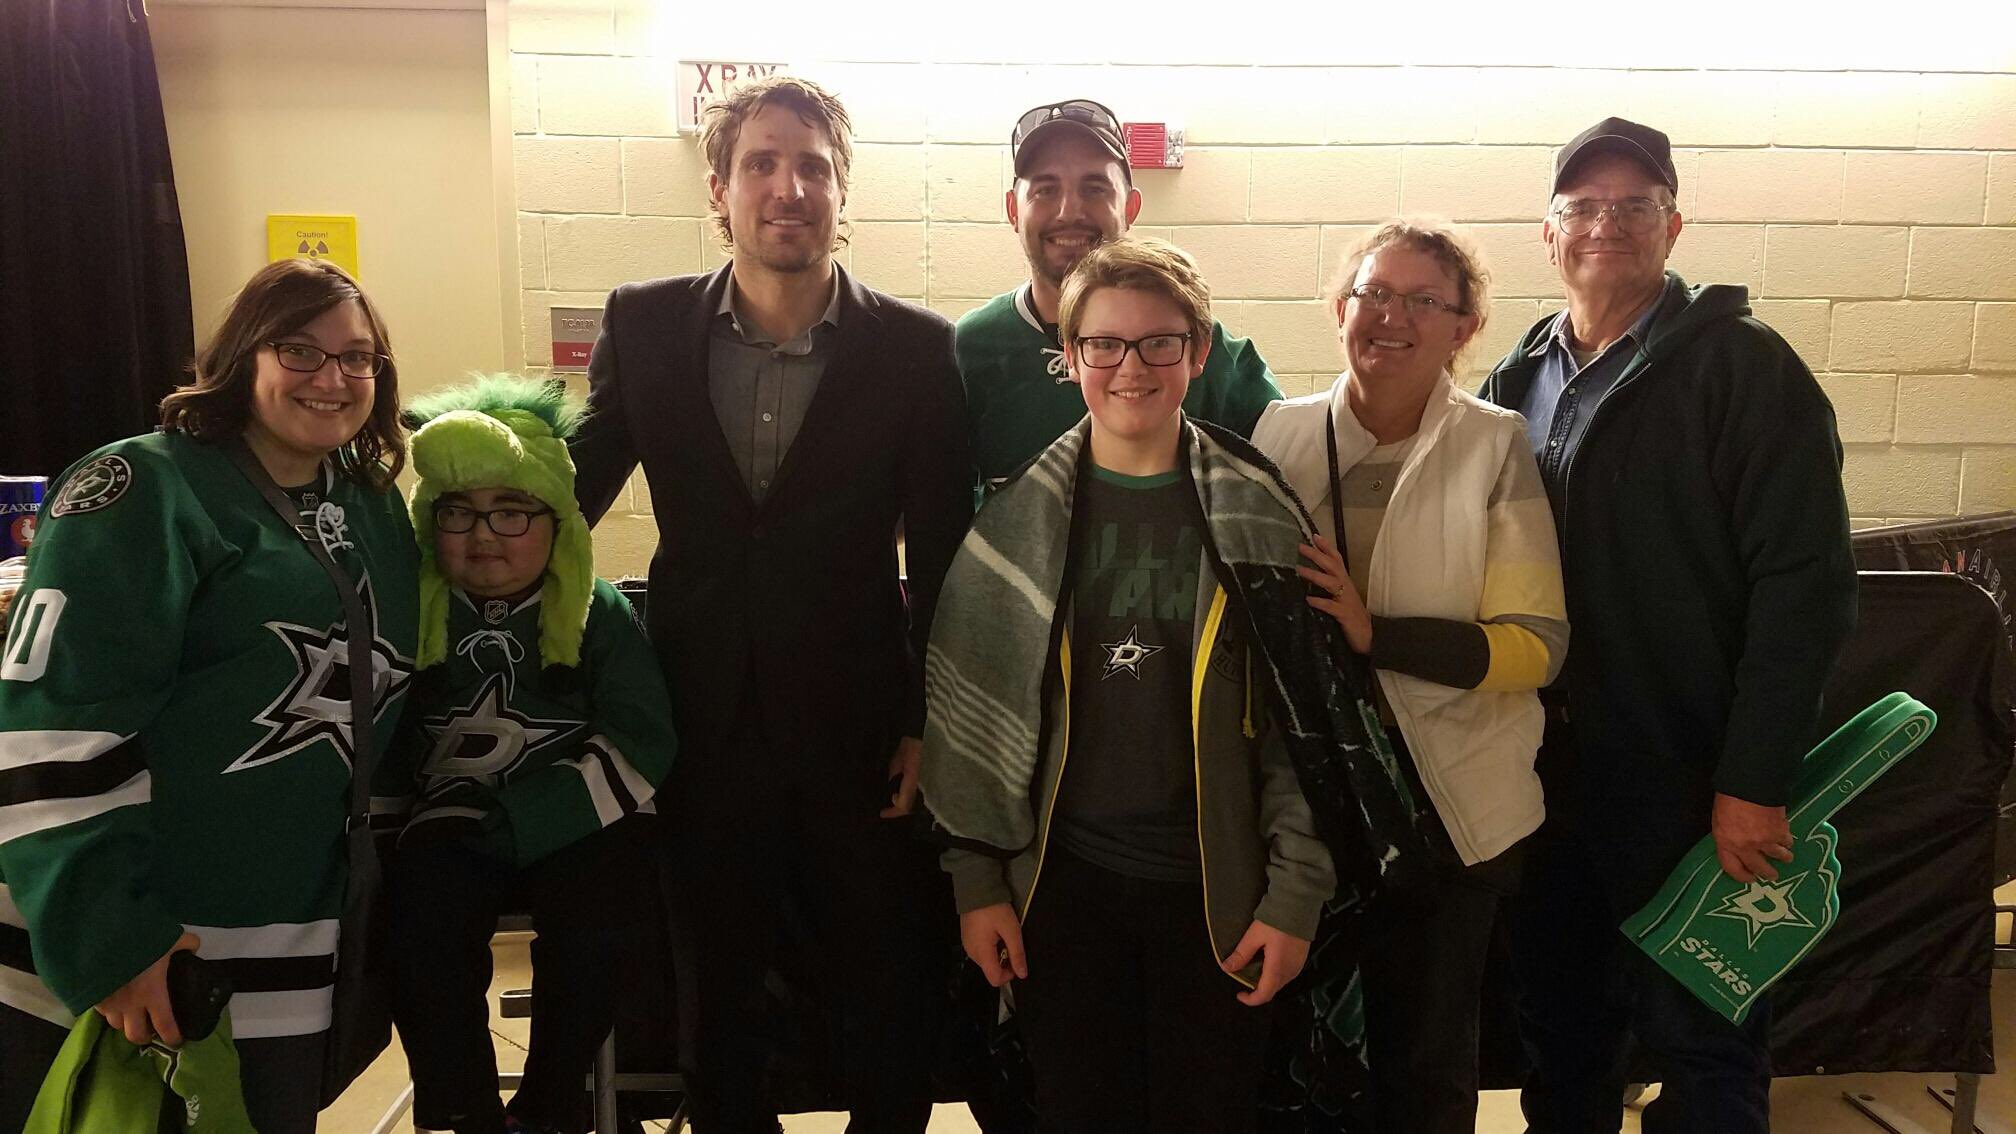 Patrick Sharp on X: Game hat goes to our special guest Nathan for